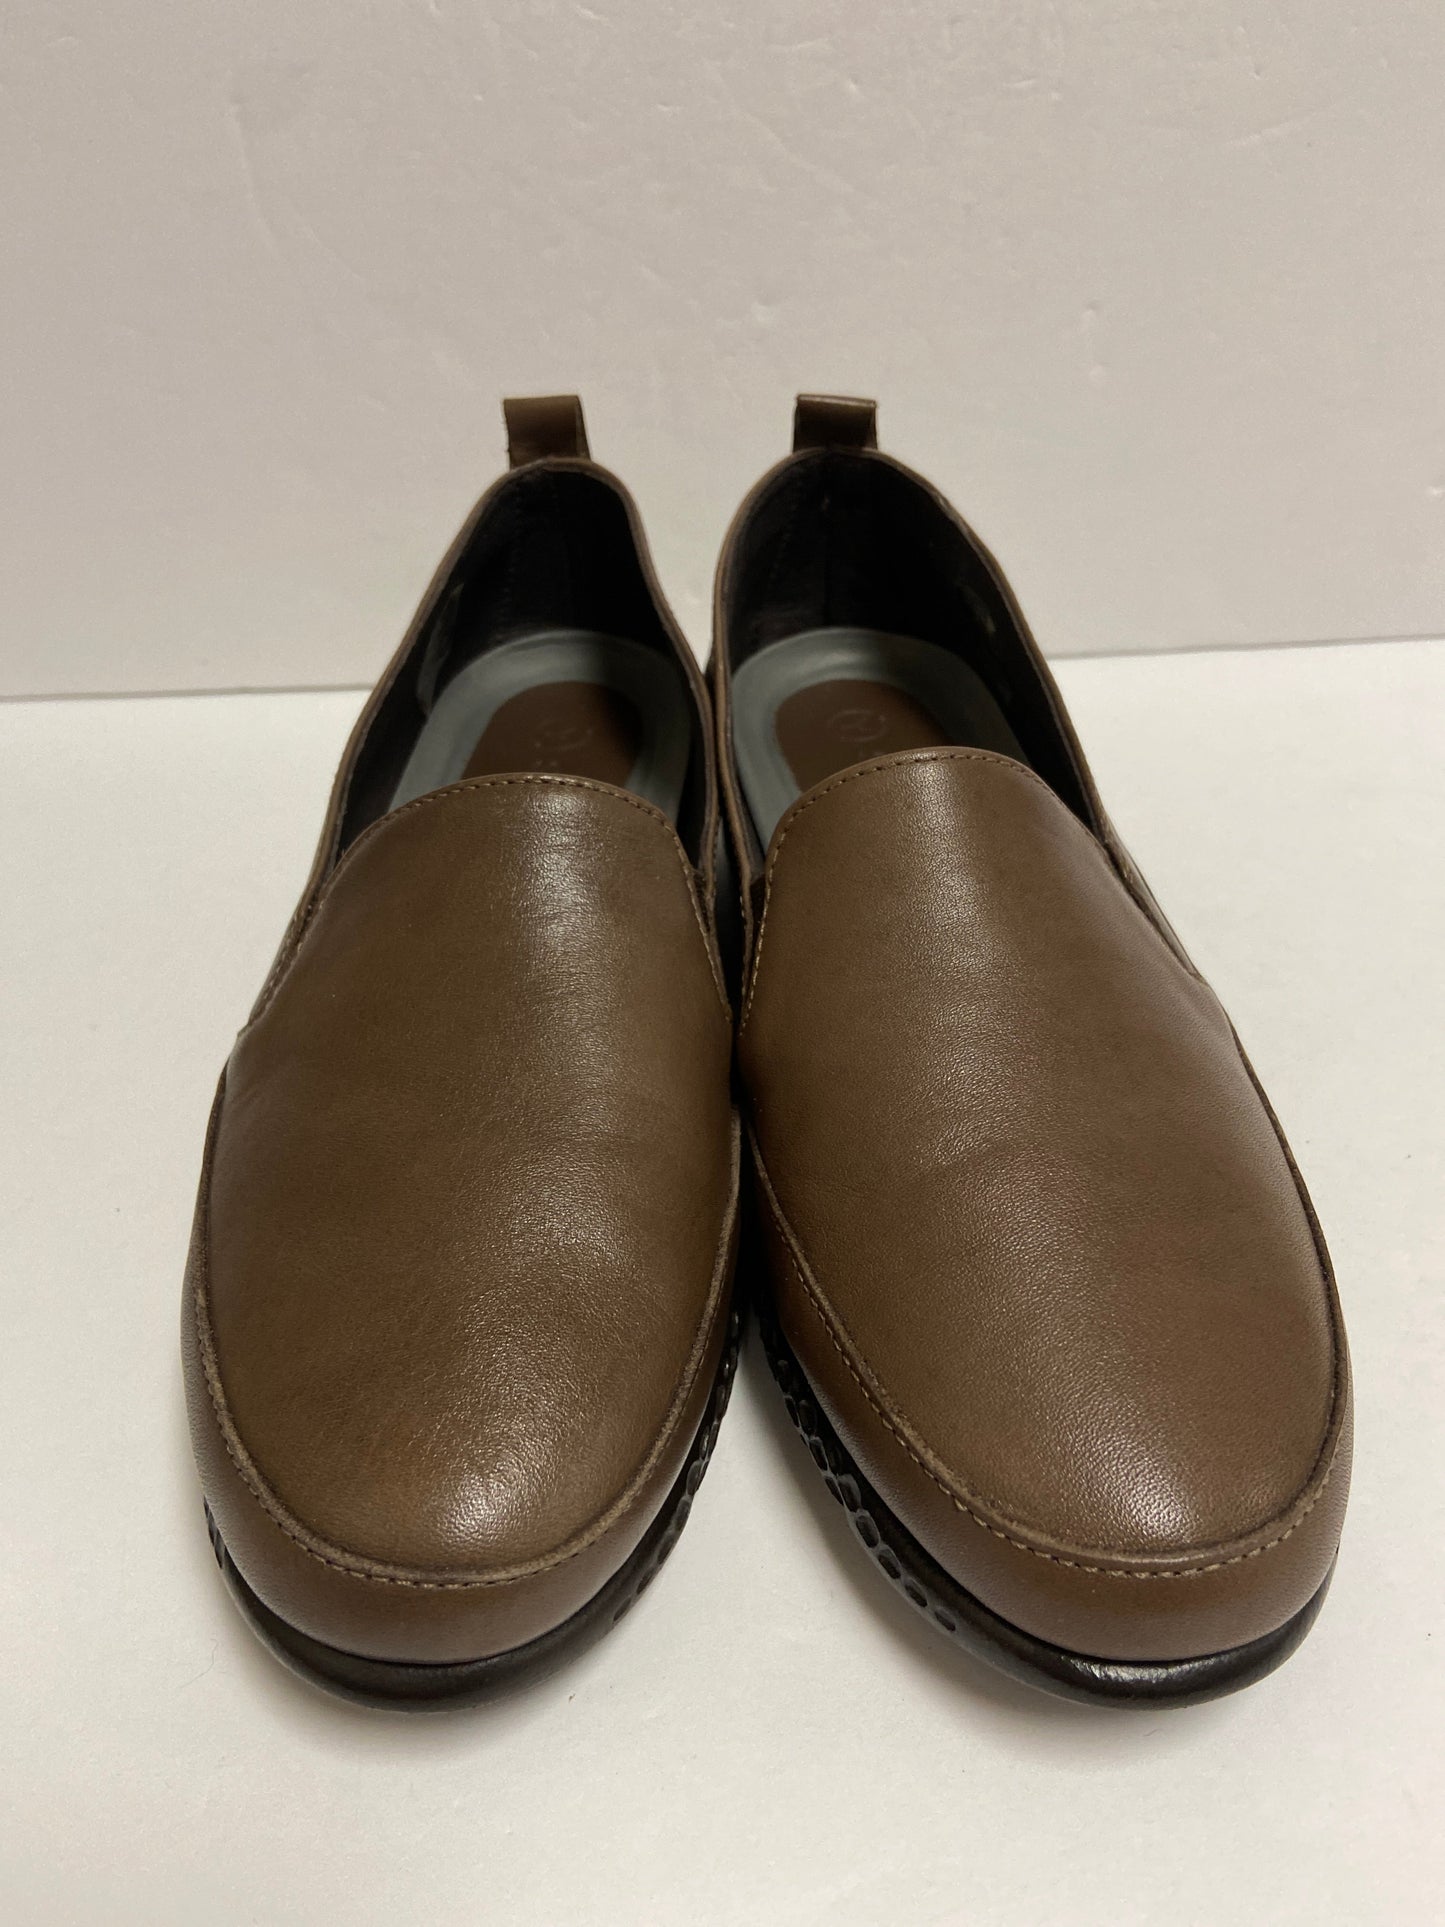 Shoes Flats Loafer Oxford By Cmc  Size: 8